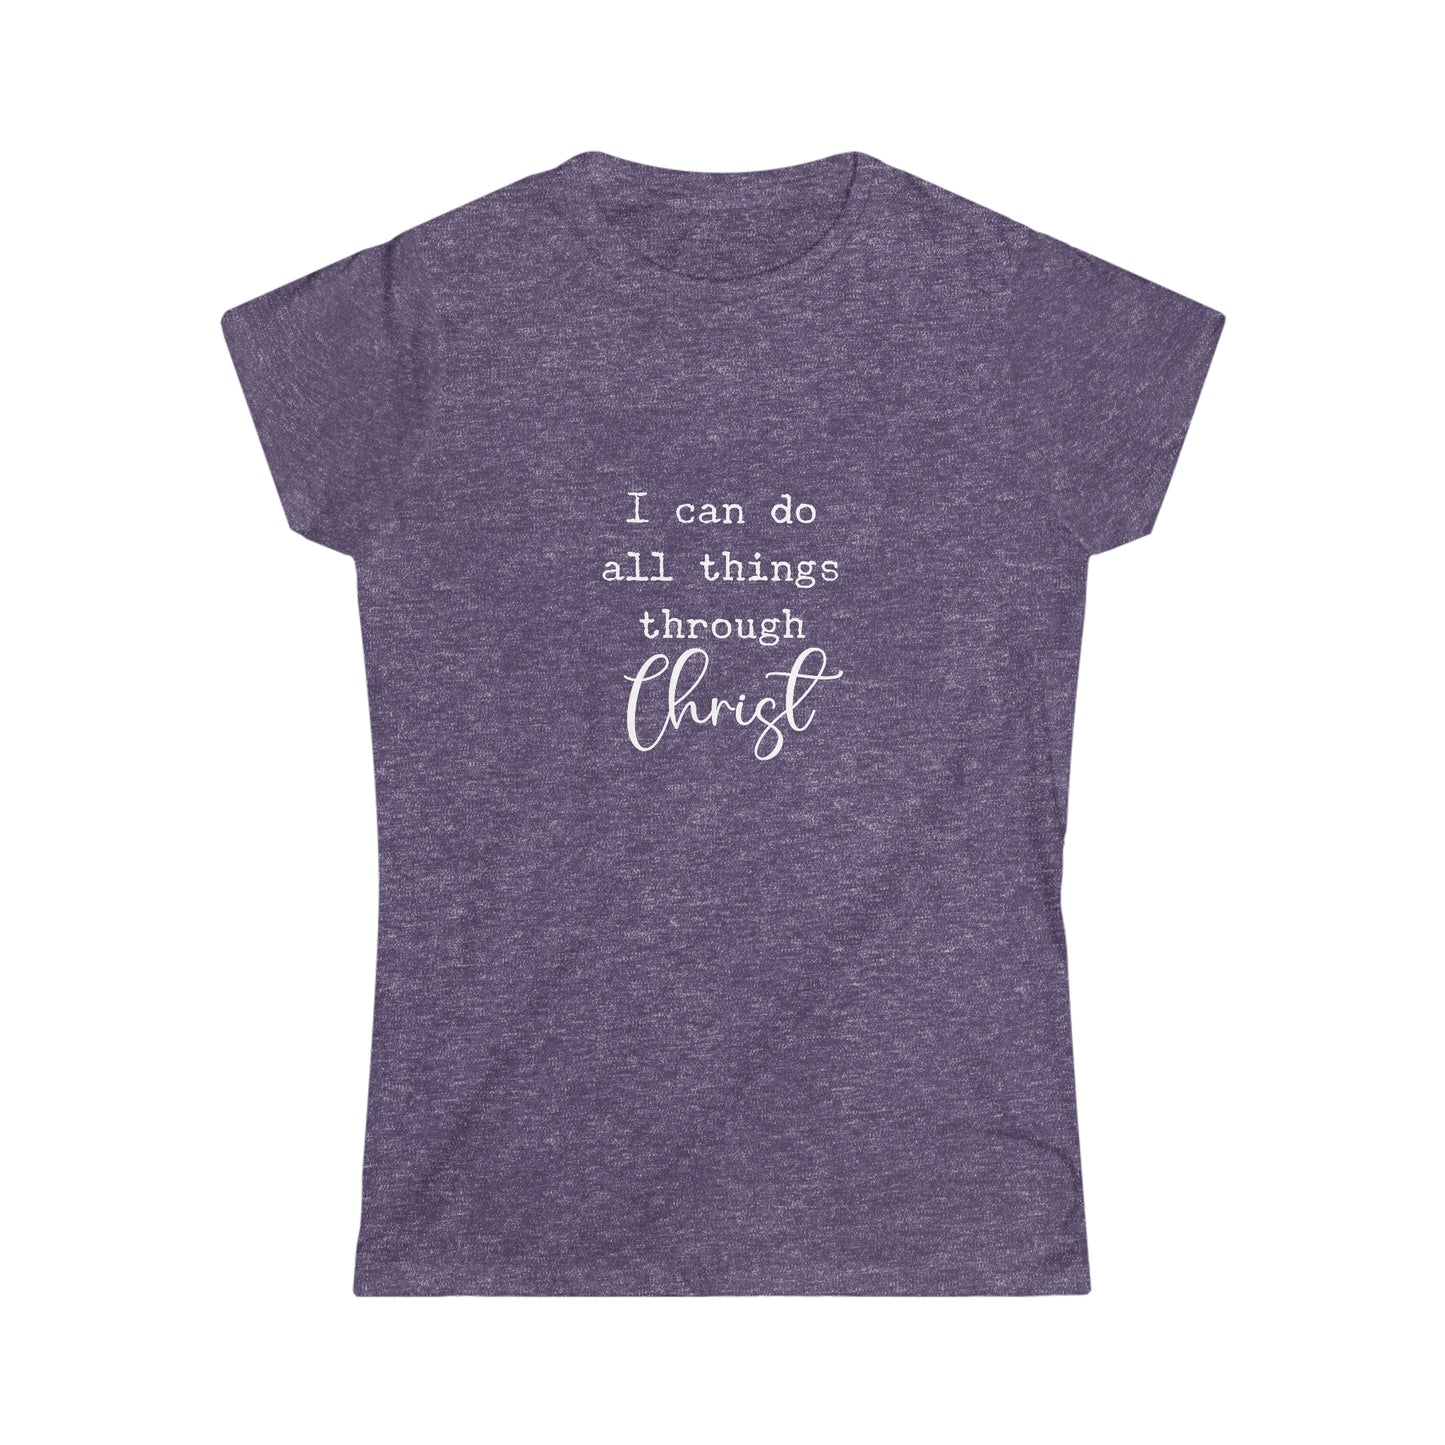 Women's Softstyle Tee, I can do all things through Christ